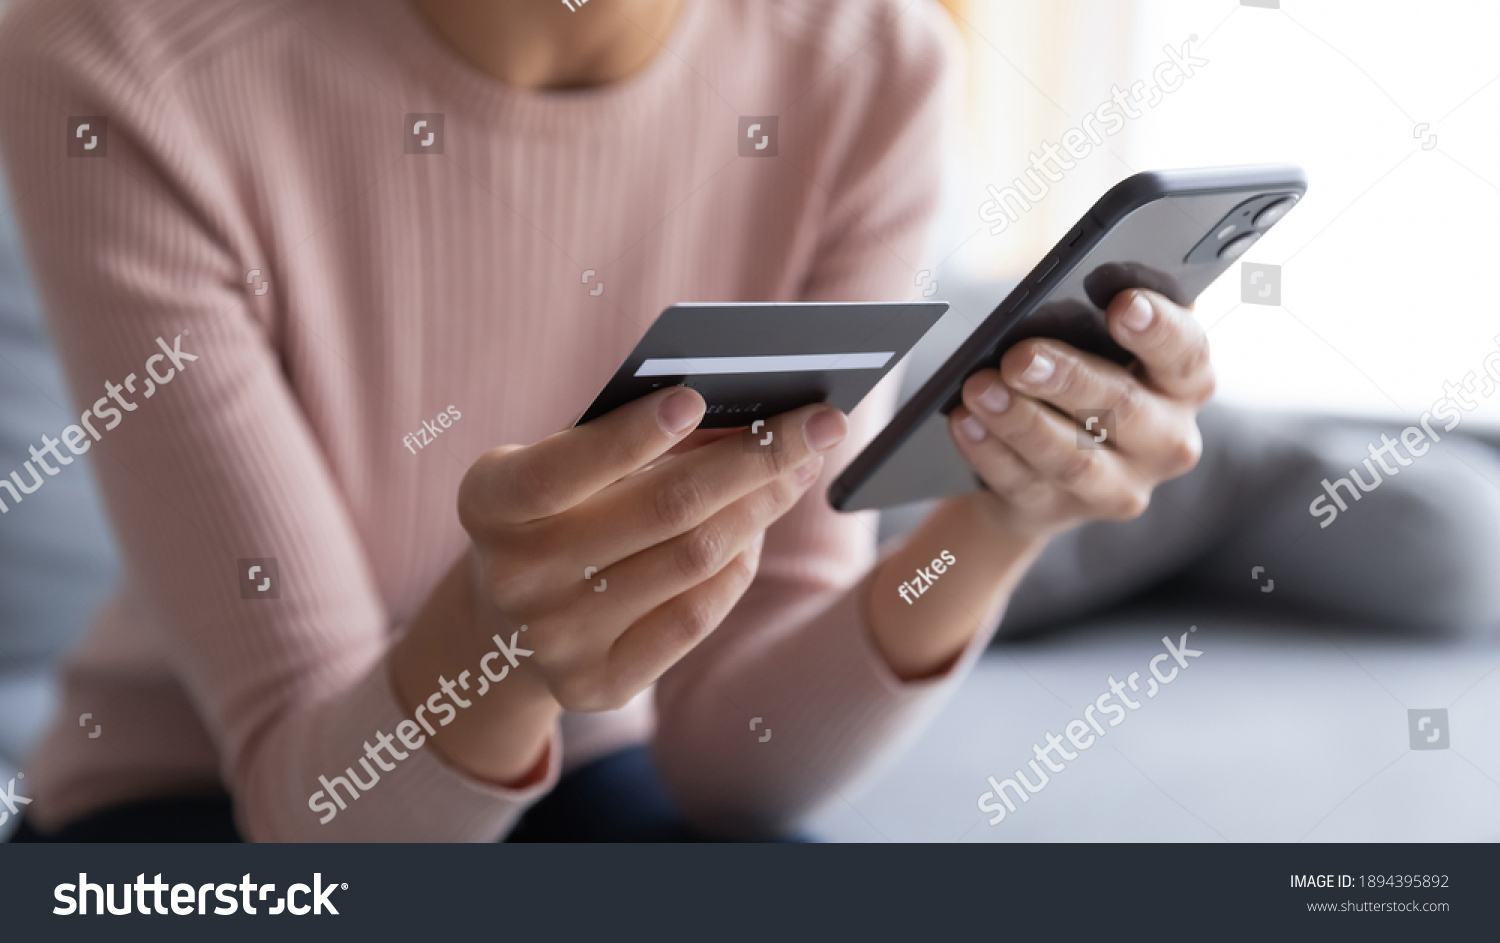 Close up female hands holding credit card and smartphone, young woman paying online, using banking service, entering information, shopping, ordering in internet store, doing secure payment #1894395892